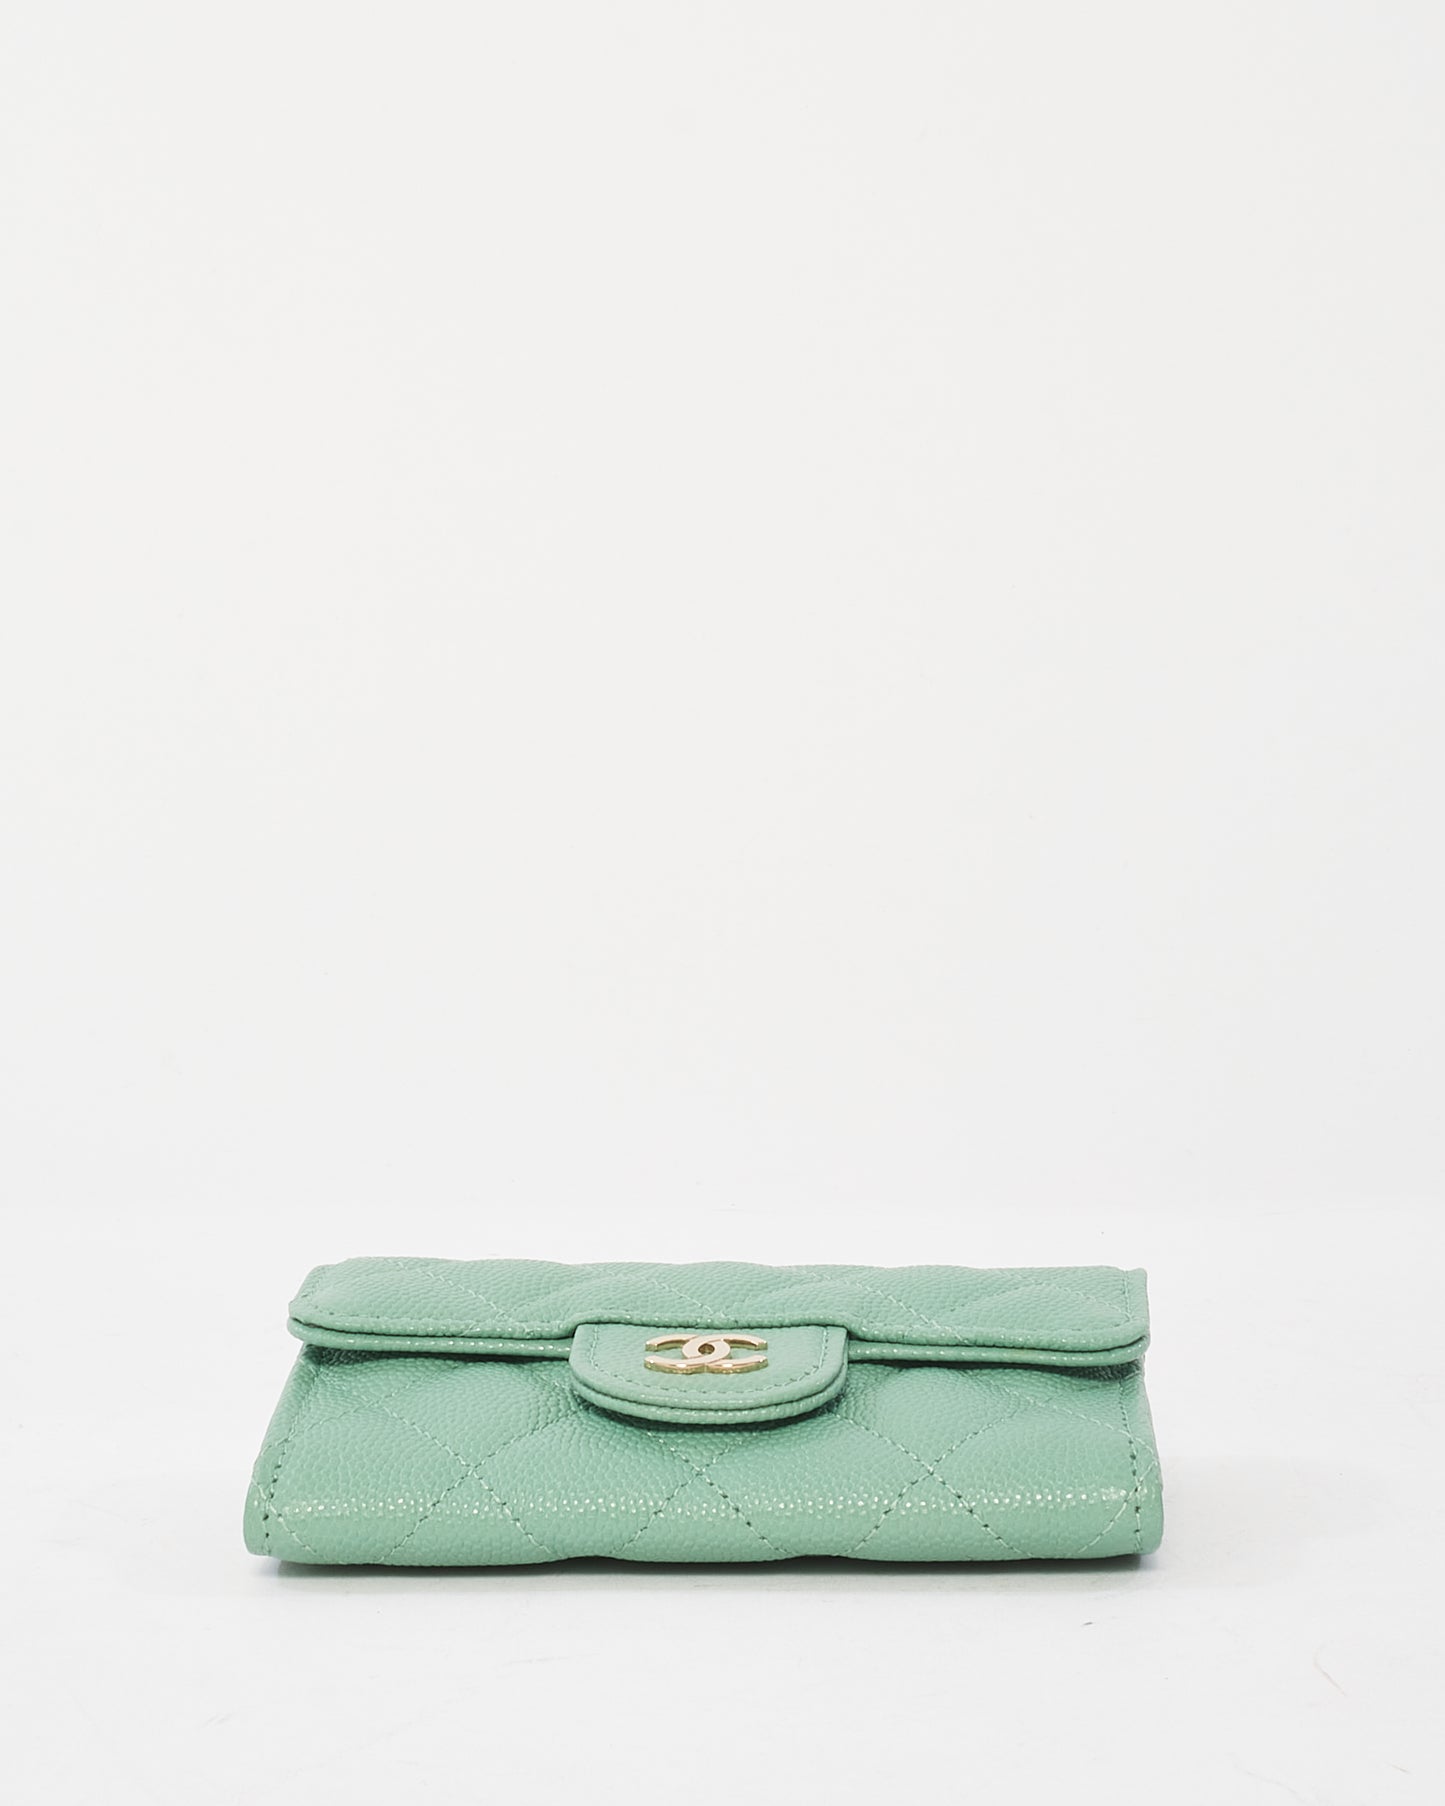 Chanel Mint Green Caviar Leather Flap Card Case